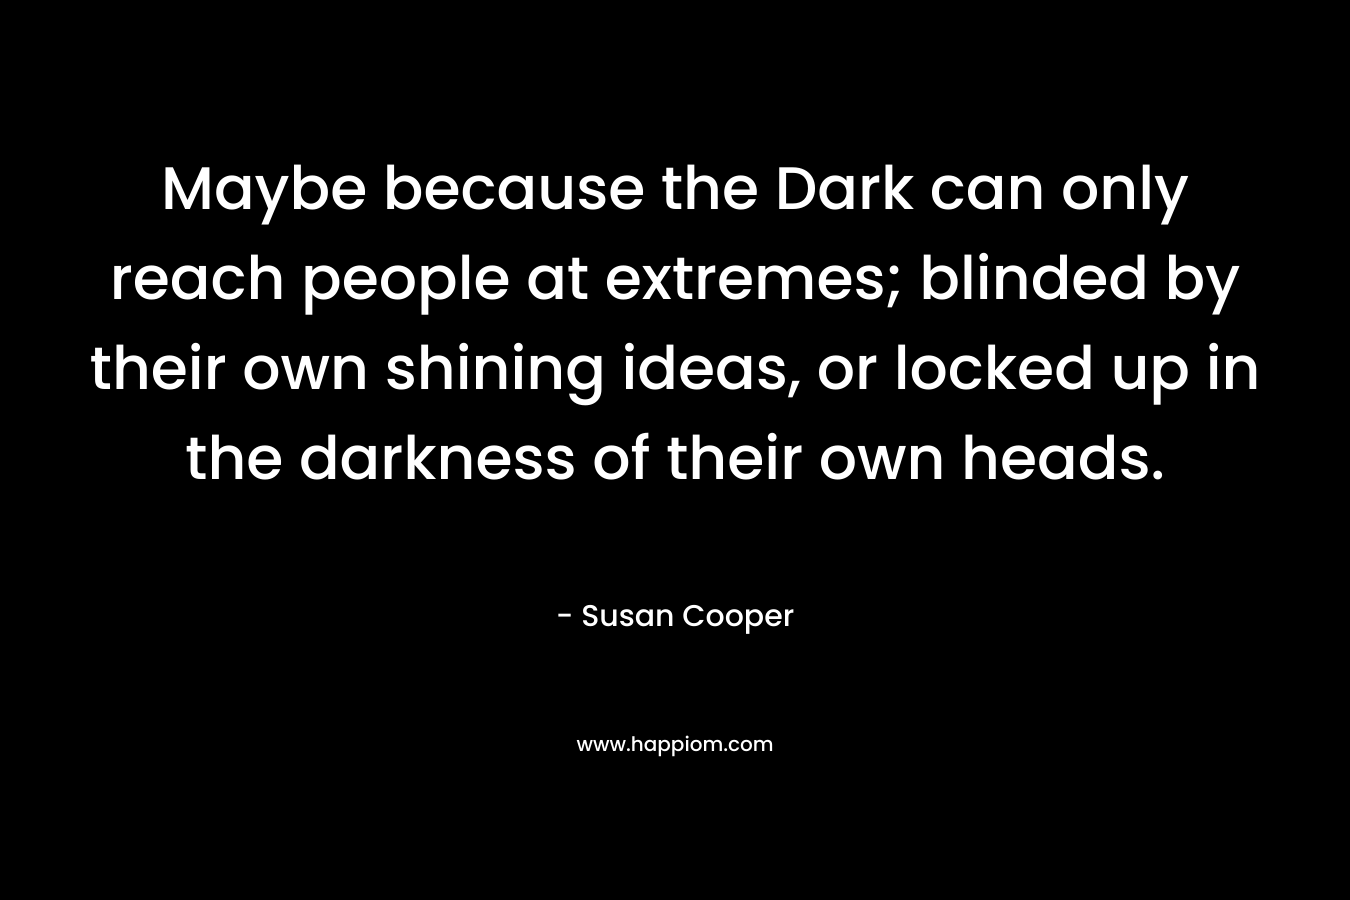 Maybe because the Dark can only reach people at extremes; blinded by their own shining ideas, or locked up in the darkness of their own heads.